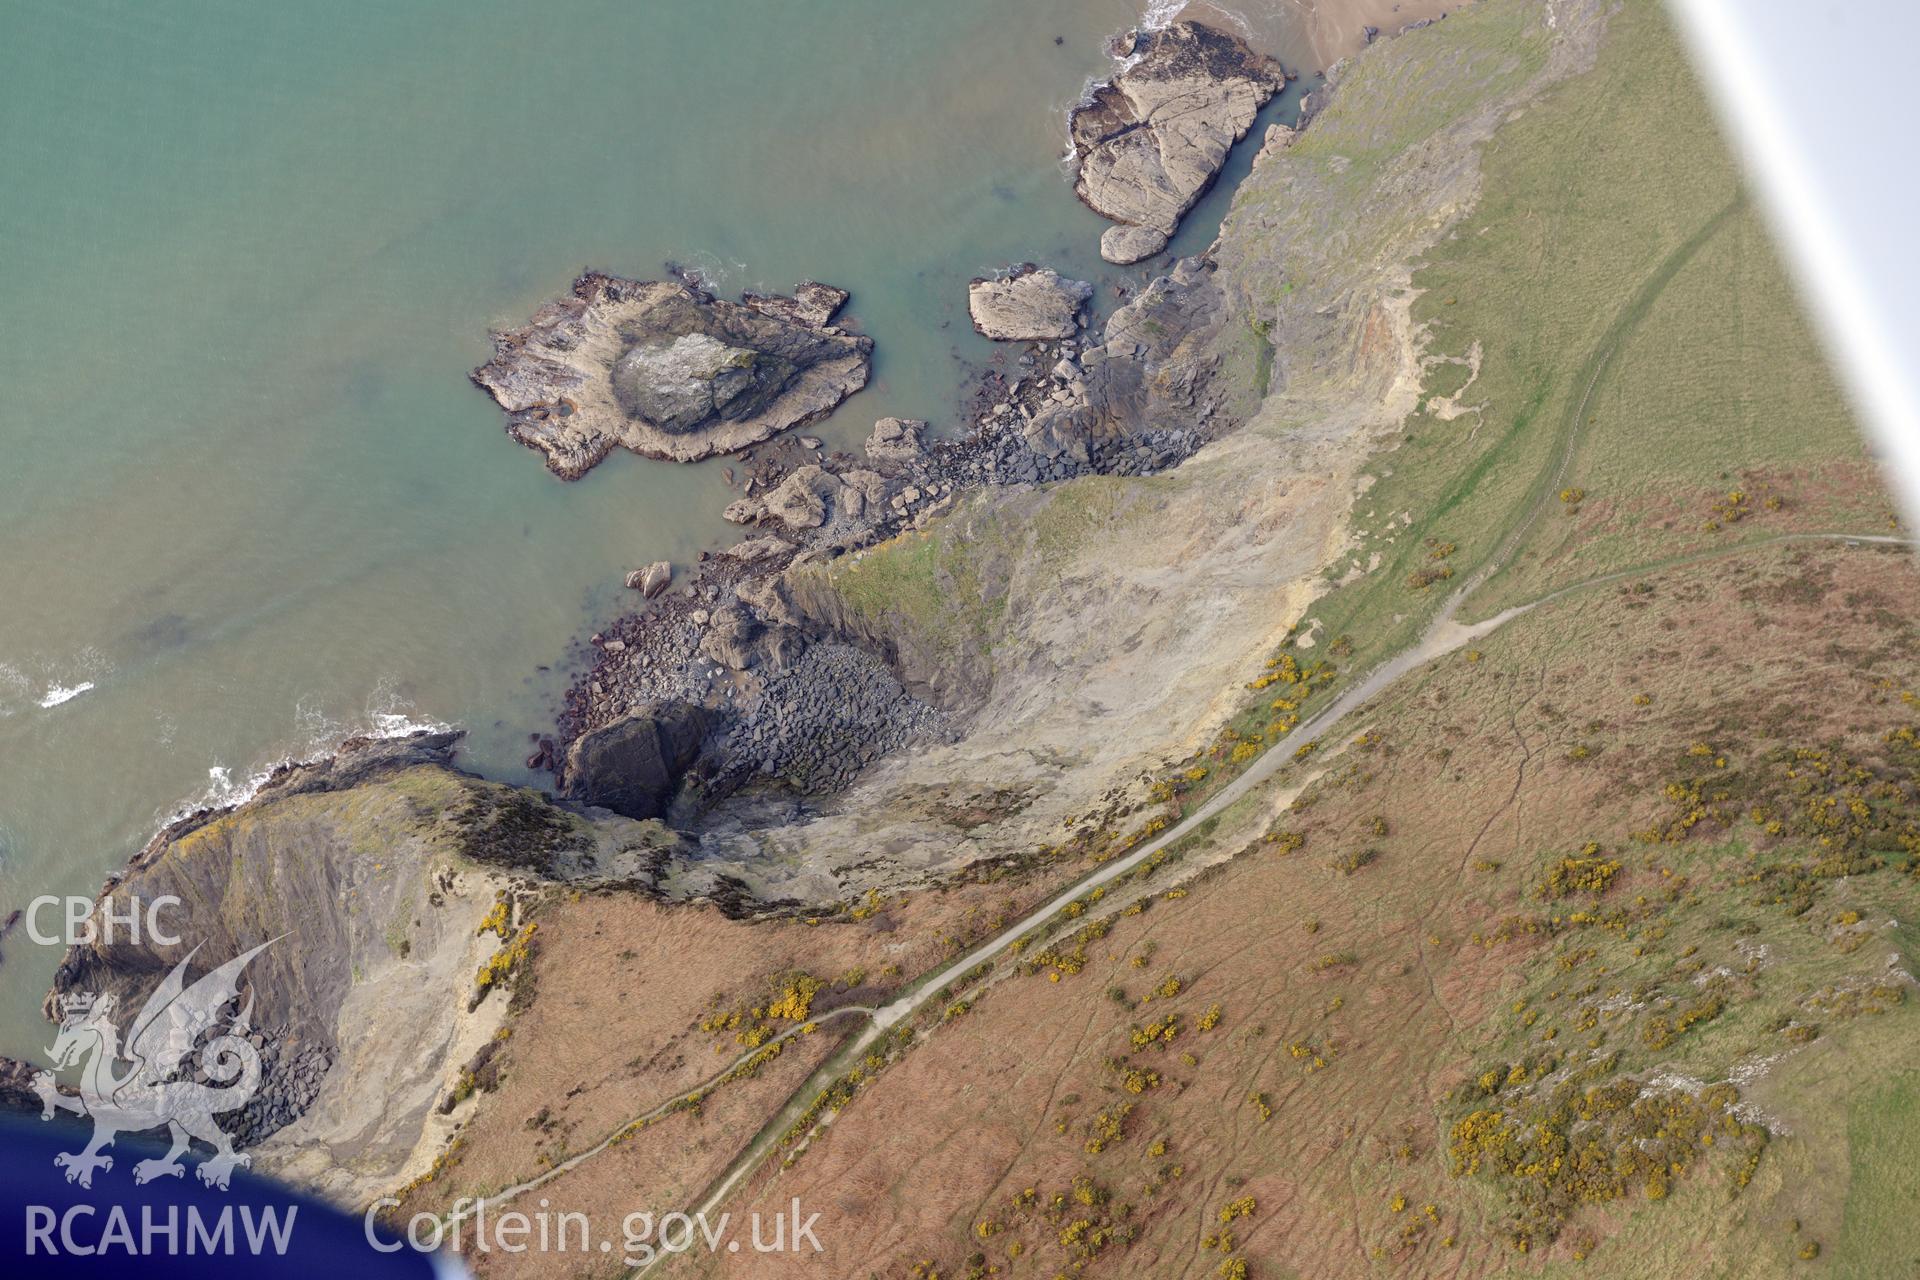 Aerial photography of Pen Dinas Lochtyn taken on 27th March 2017. Baseline aerial reconnaissance survey for the CHERISH Project. ? Crown: CHERISH PROJECT 2019. Produced with EU funds through the Ireland Wales Co-operation Programme 2014-2020. All material made freely available through the Open Government Licence.